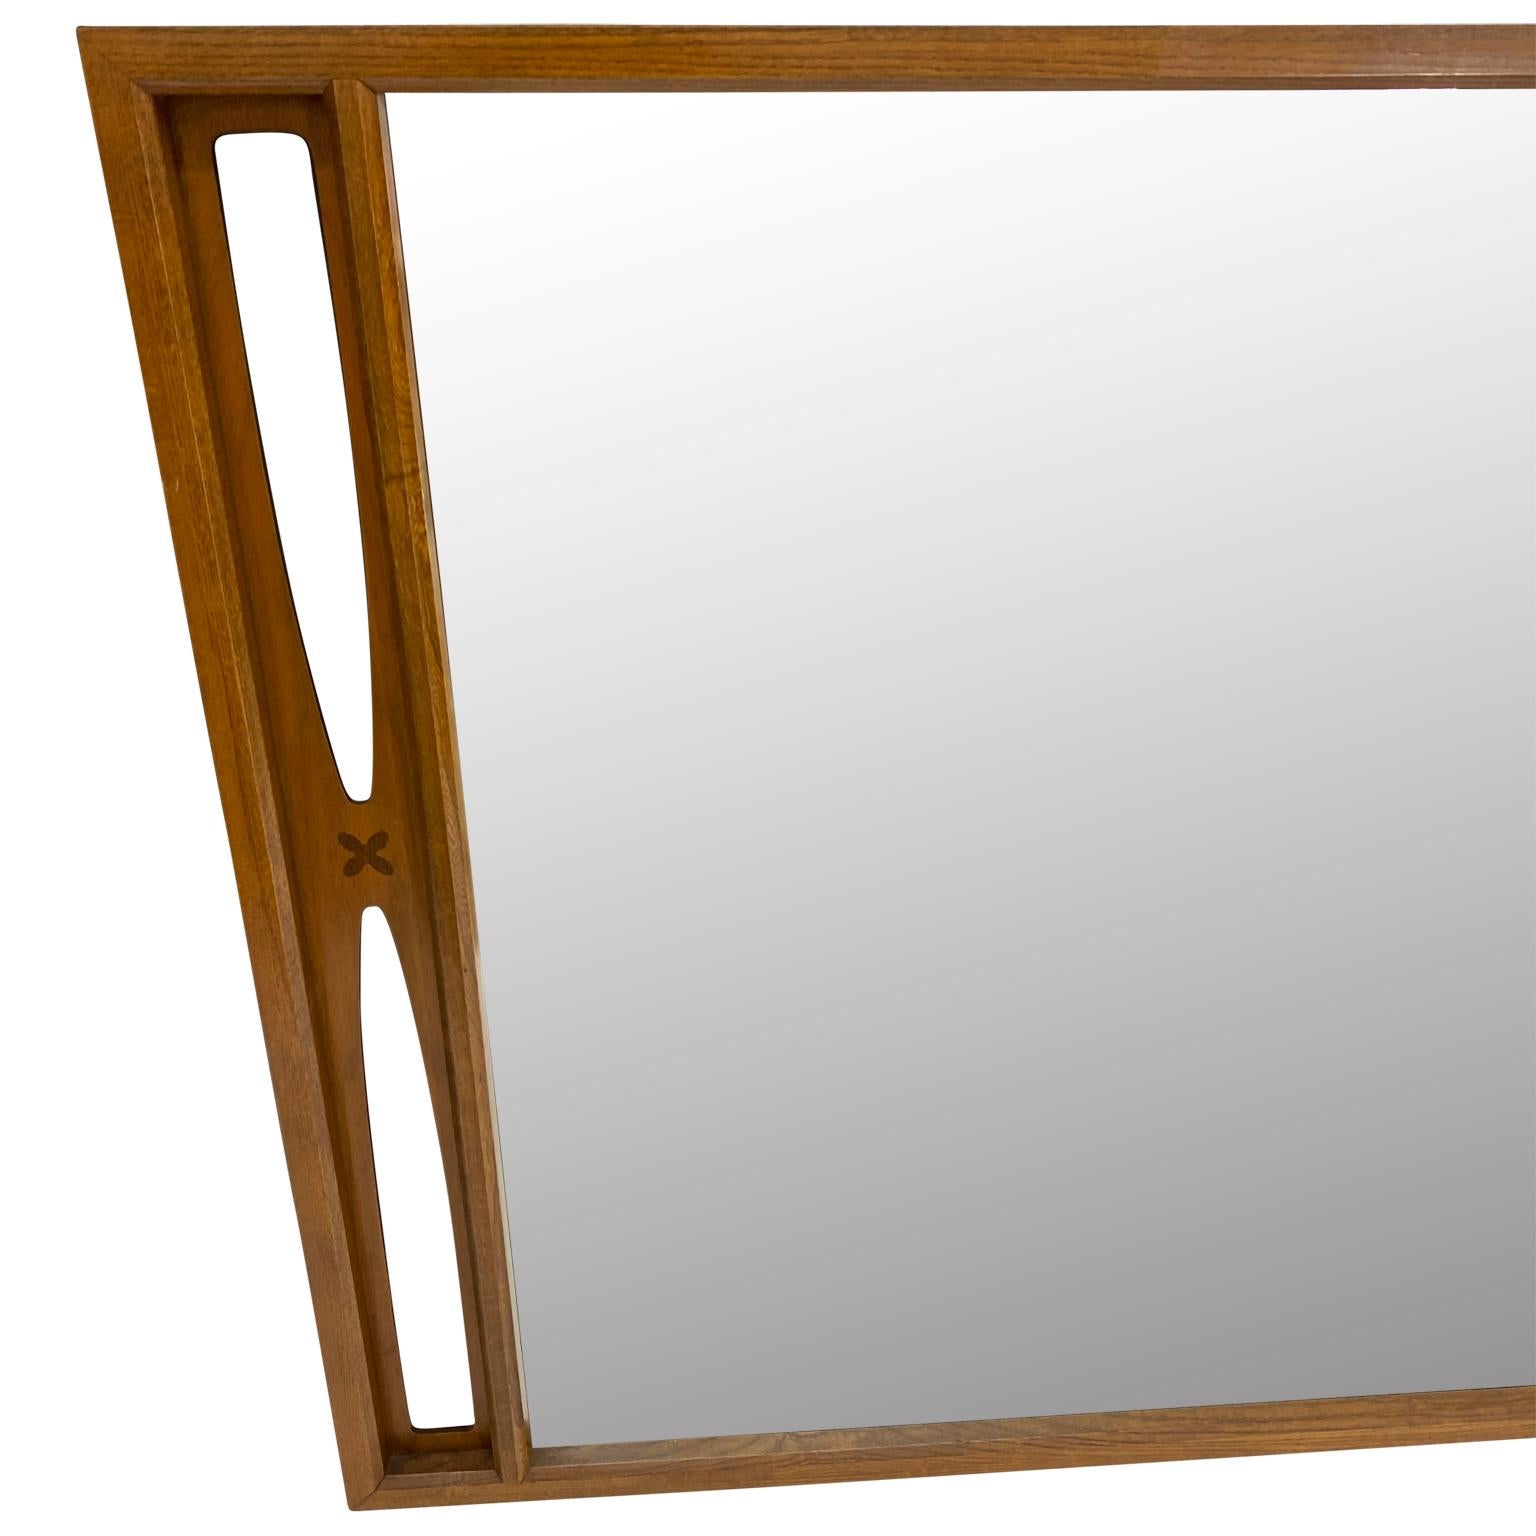 Mid-Century Modern mirror with inlay accents. This mirror is outstanding. The end pieces have inlay and cut-out design. The mirror can be hung on the diagonal or horizontal. A perfect example of Scandinavian style mid-century design, the mirror is